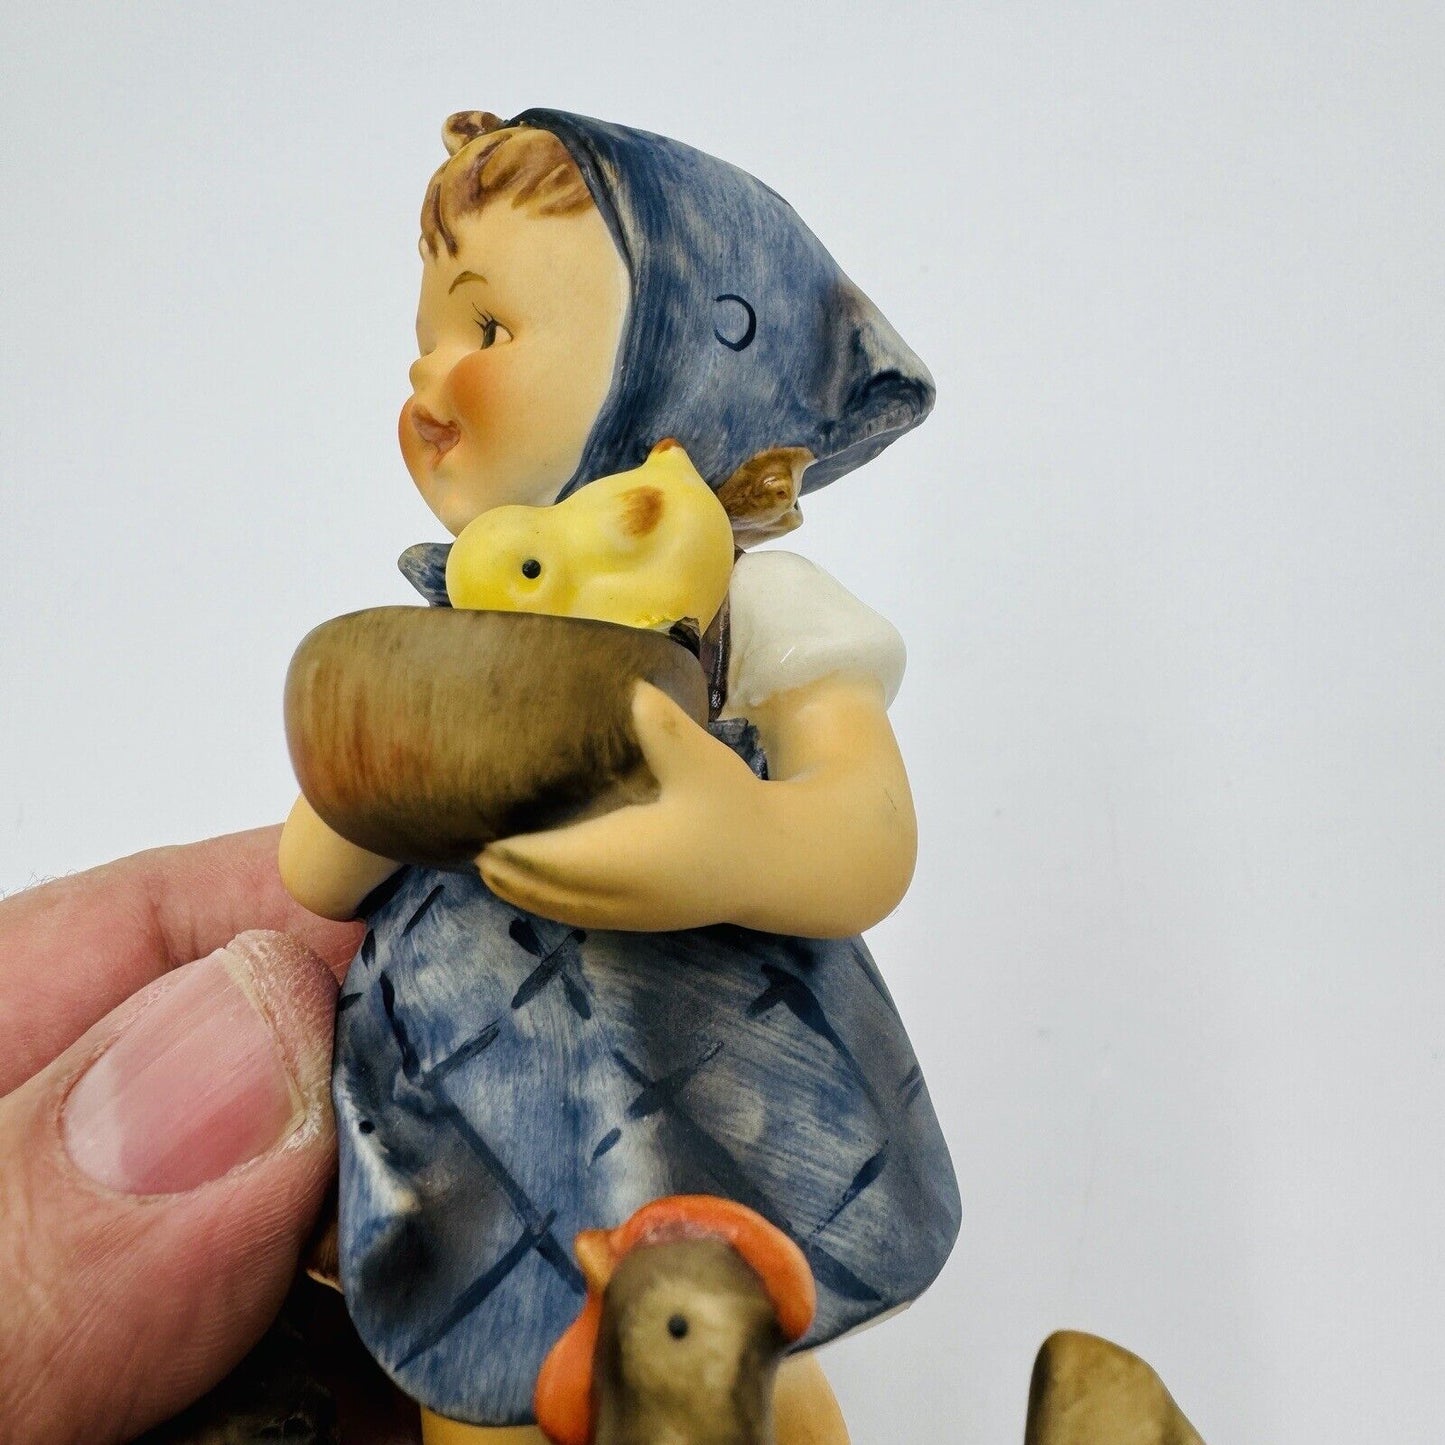 Hummel Goebel West Germany Little Girl with Chickens Feeding Time 199/0 Figurine